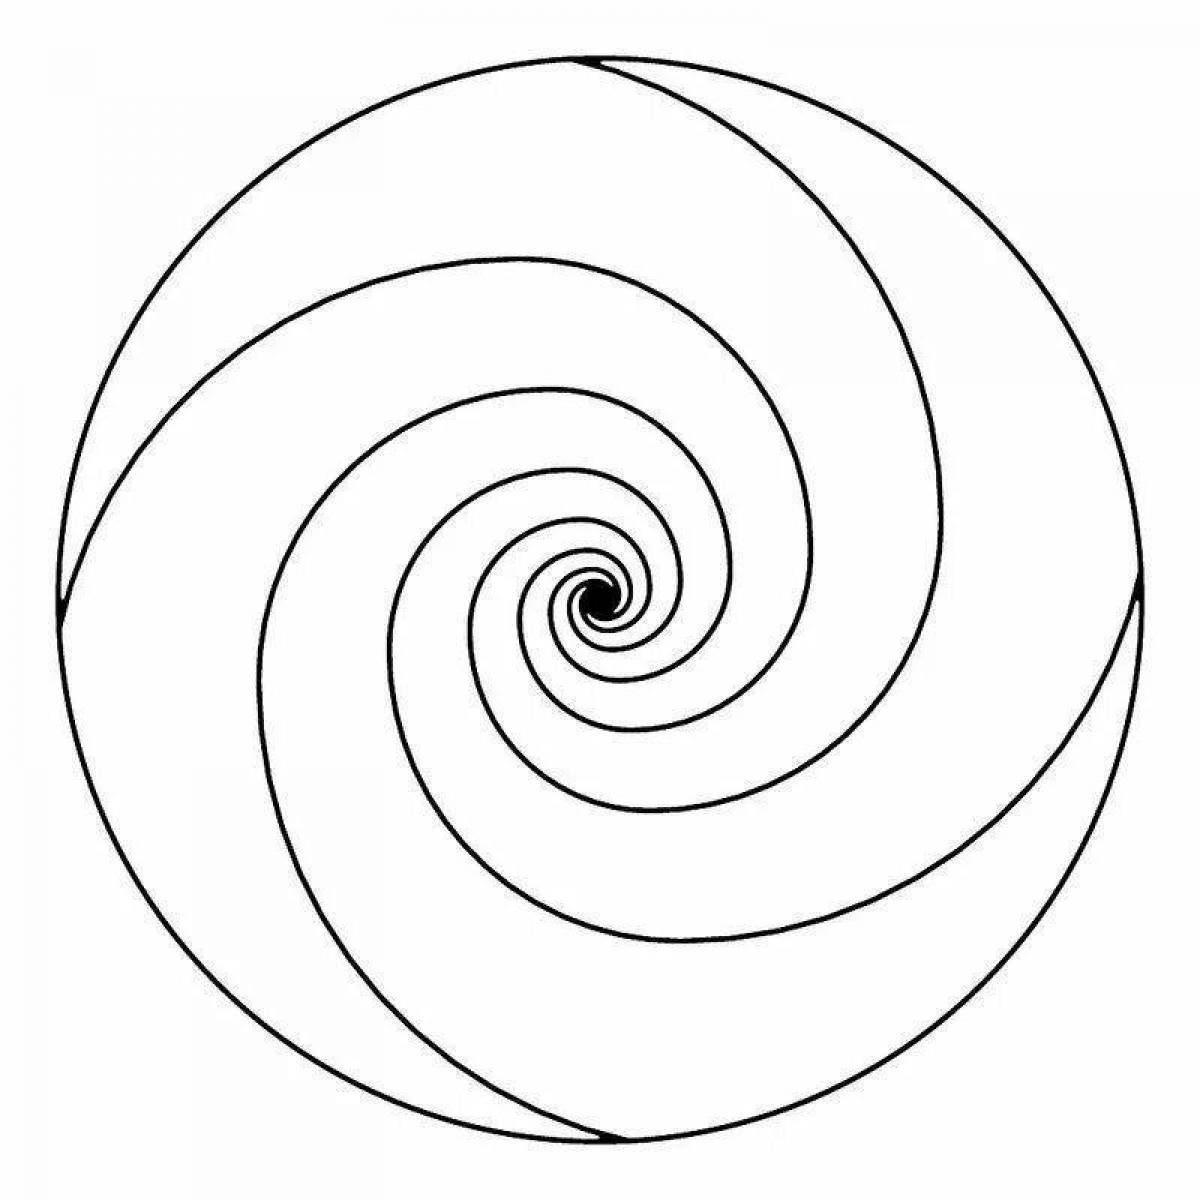 Intricately make your own spiral